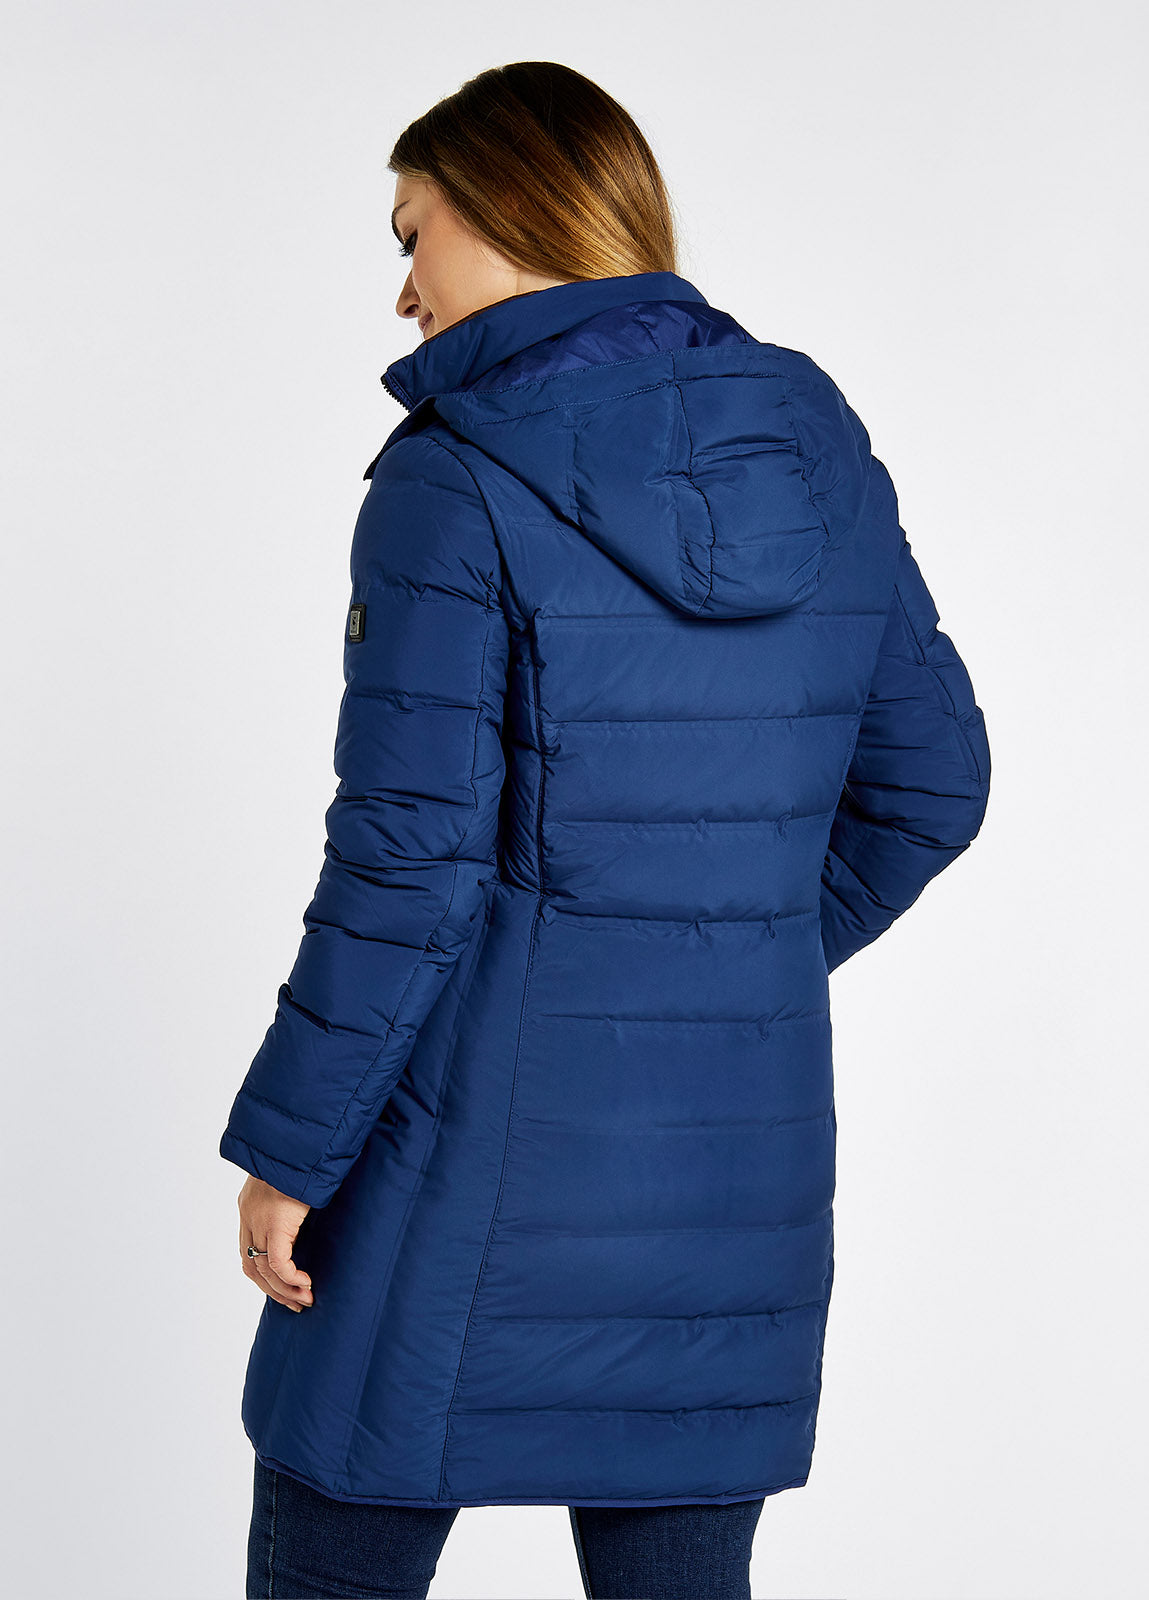 Ballybrophy Quilted Jacket - Peacock Blue